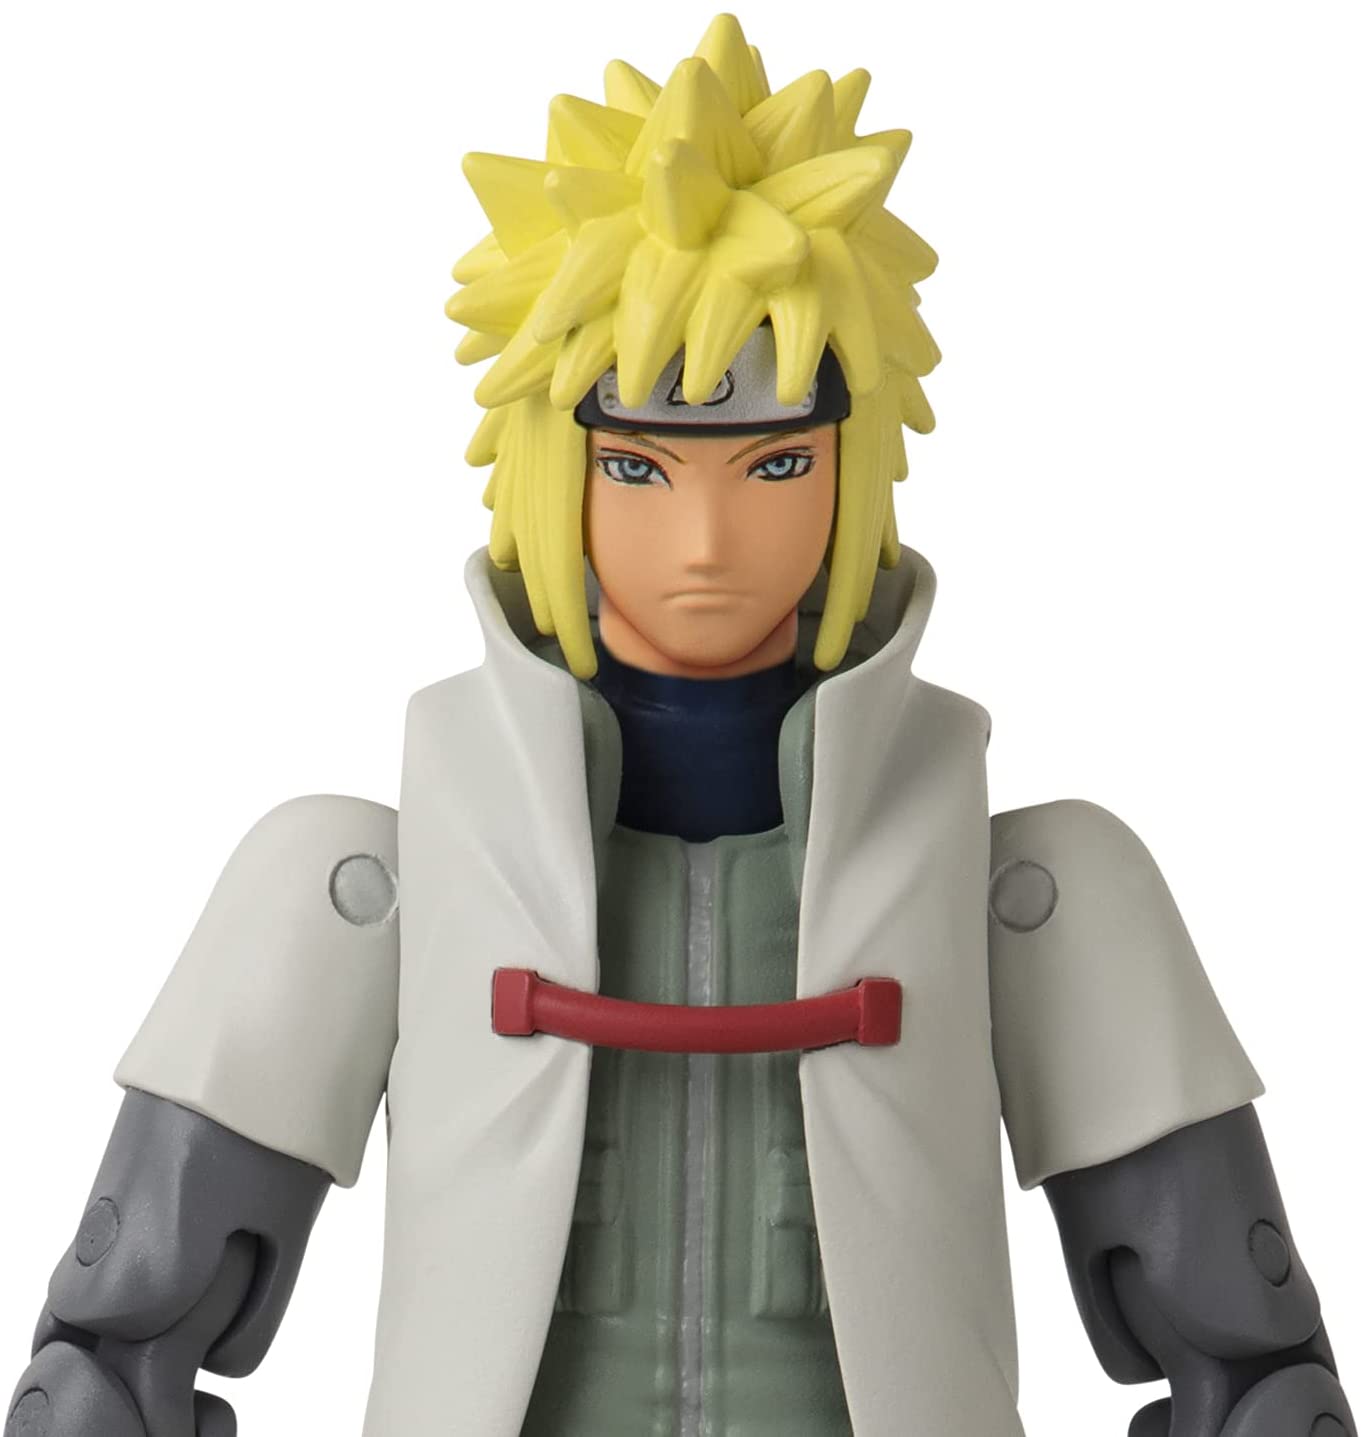 Anime Heroes Official Naruto Shippuden Action Figure - Namikaze Minato - Poseable Action Figure with Swappable Hands and Accessories 36905